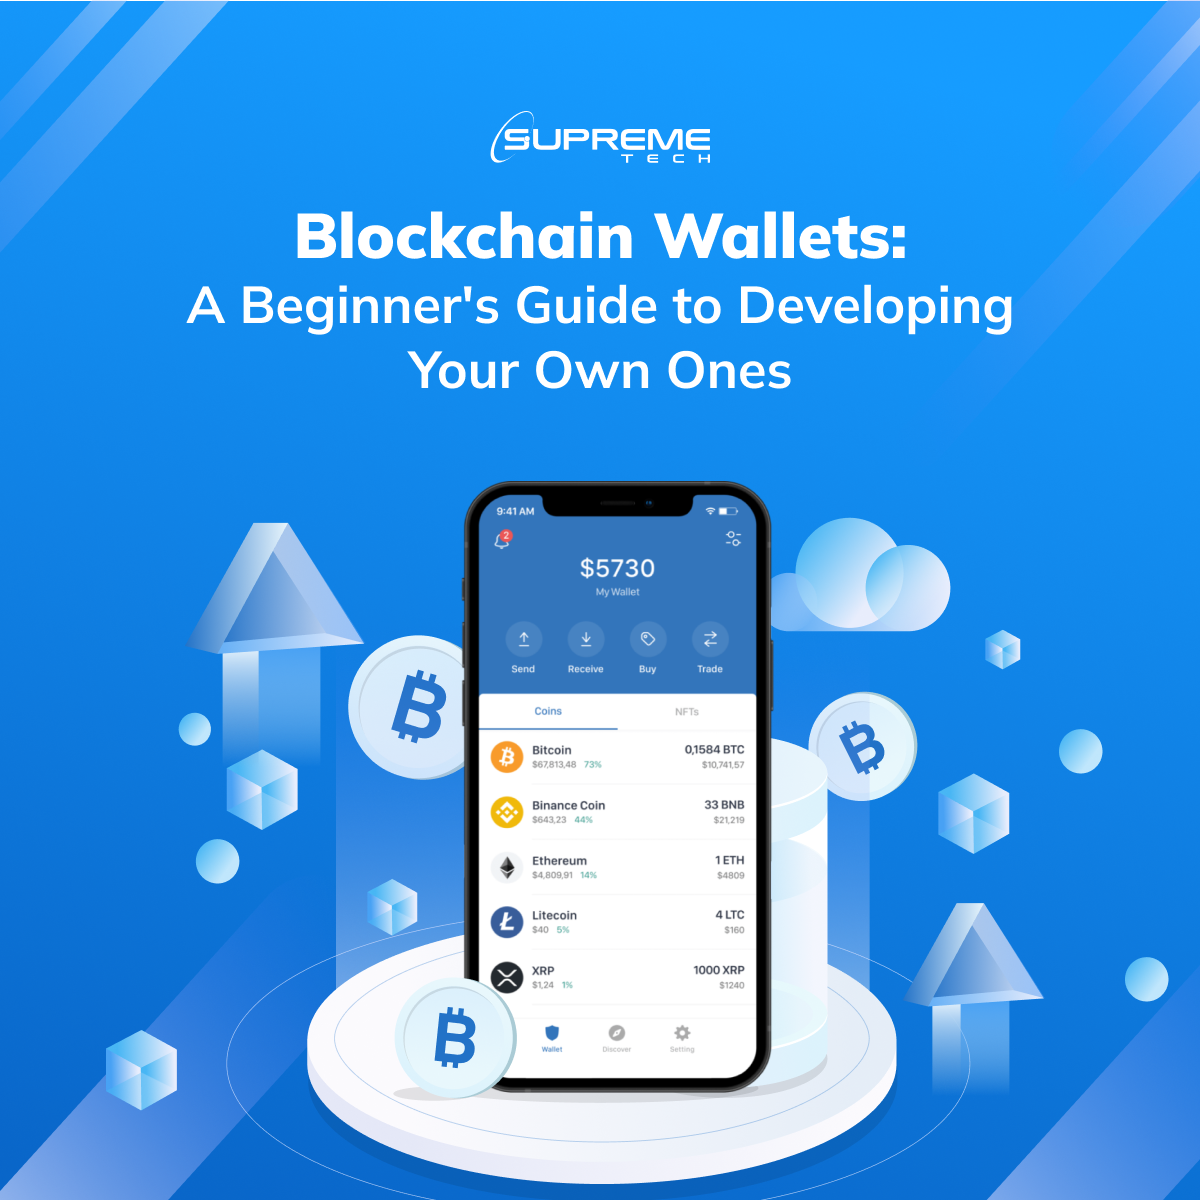 What Is Blockchain Wallet And How to Create One Yourself?